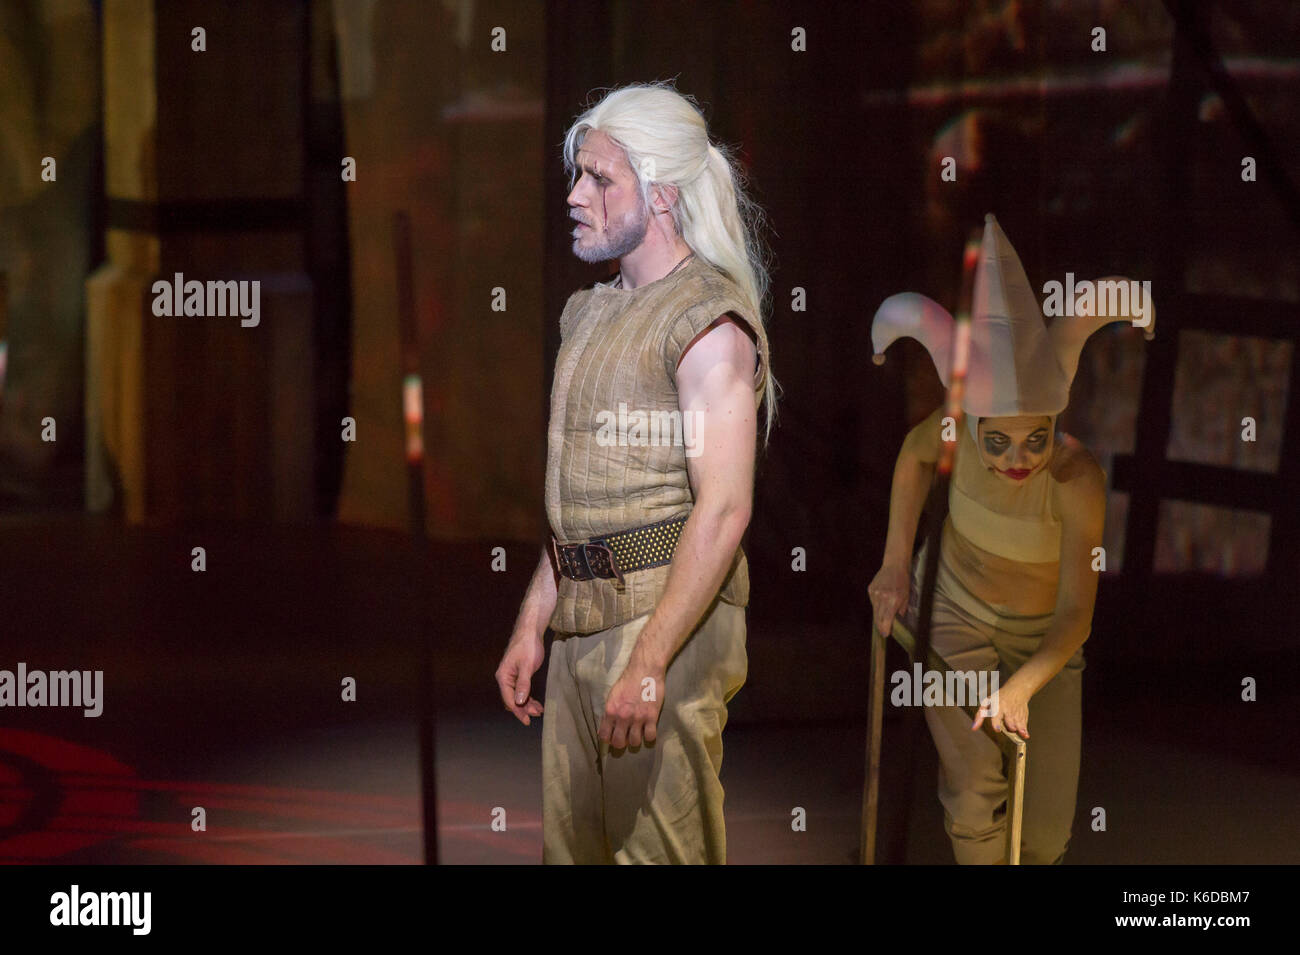 Krzysztof Kowalski as Geralt of Rivia during a media rehearsal of The Witcher musical in Music Theatre in Gdynia, Poland 12 September 2017 © Wojciech Strozyk / Alamy Live News Stock Photo